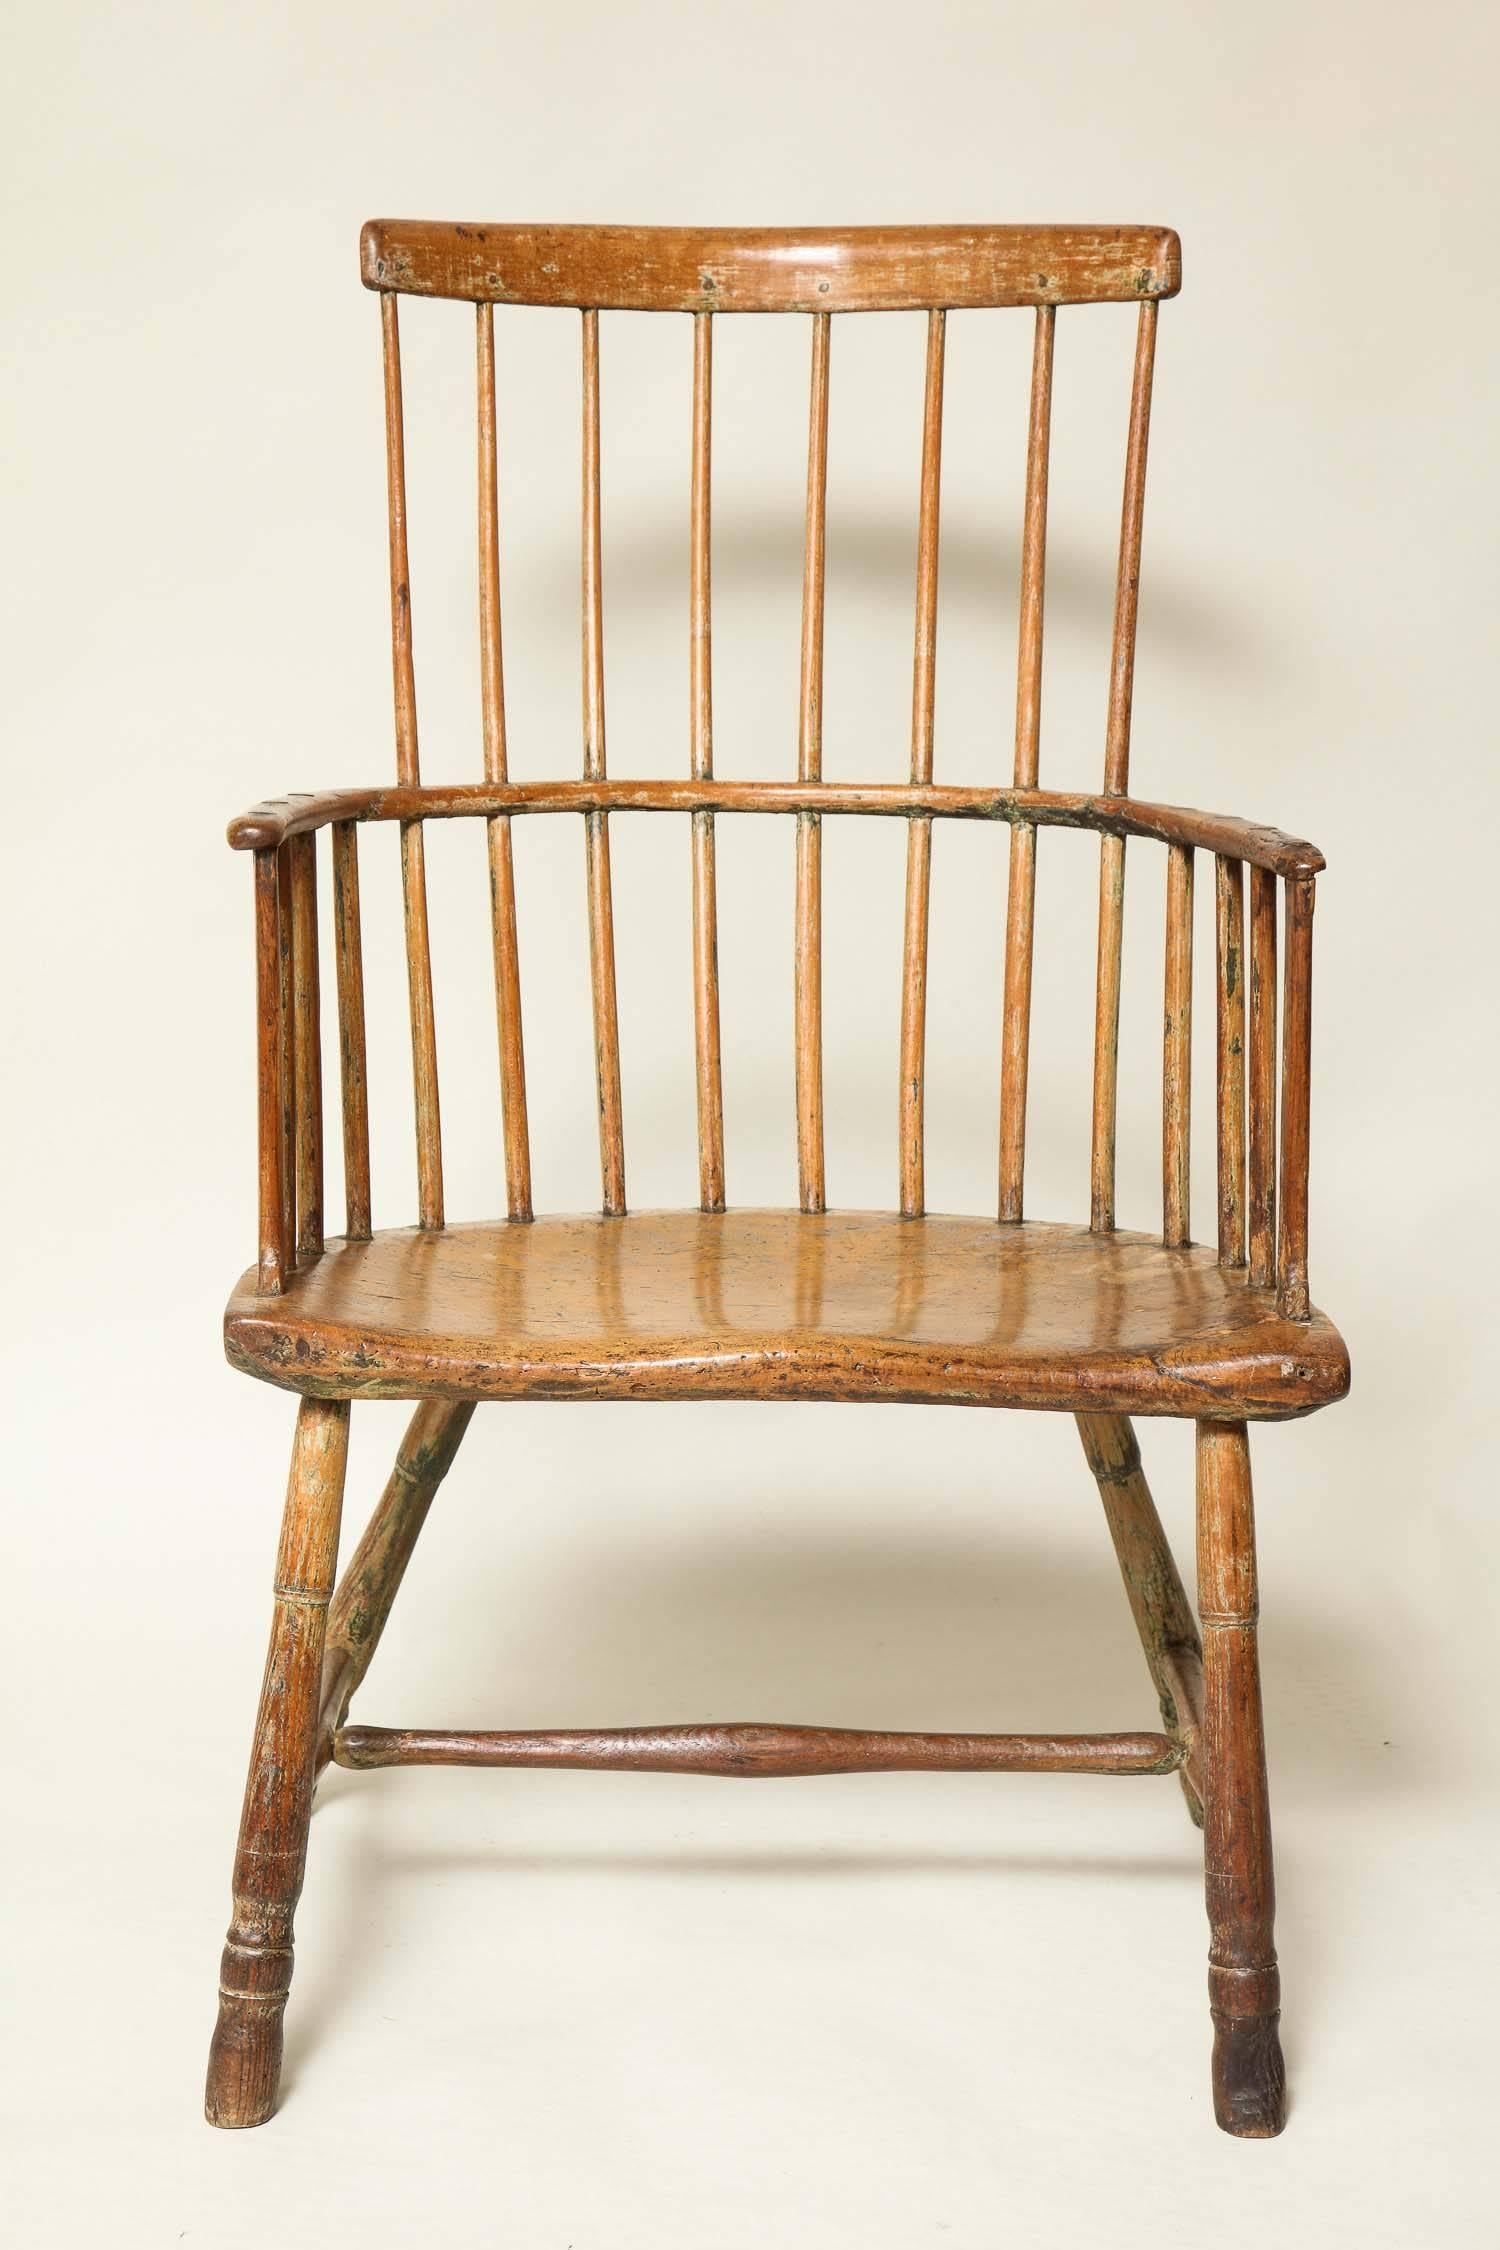 Very good 18th century English comb back Windsor armchair, the simple back supported by eight spindles, the bentwood arm with shaped end supports, over 